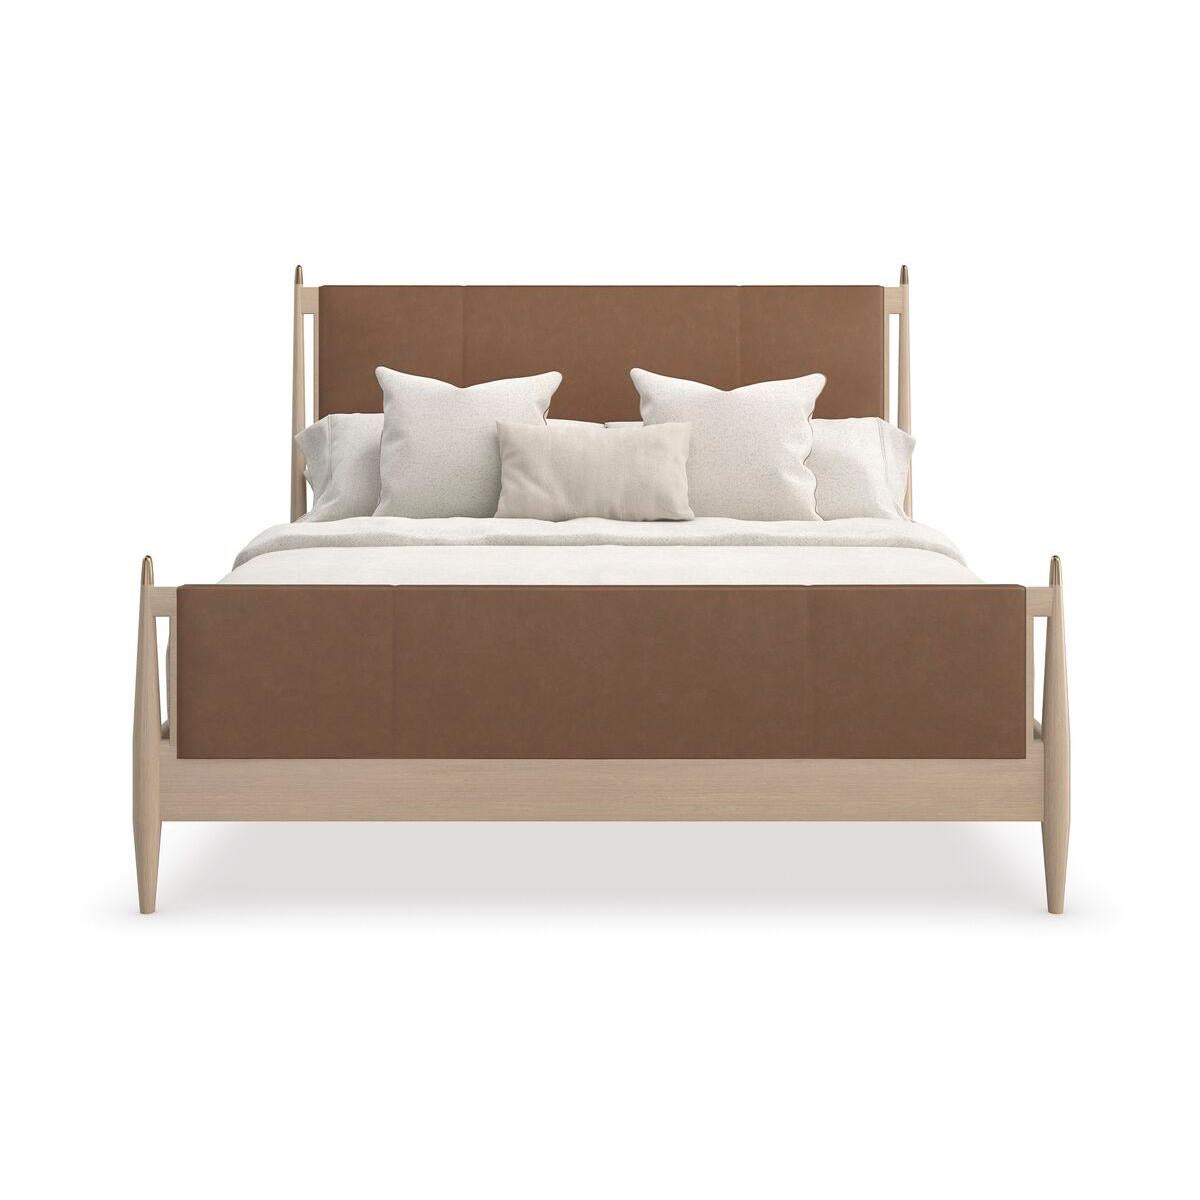 With flowing modern lines and a rich use of material, the bed brings a simple yet sophisticated cadence to bedroom interiors. Tailored in a lavish, camel-colored leather, its clean, parsons-style headboard warmly complements a Sun Drenched Oak wood